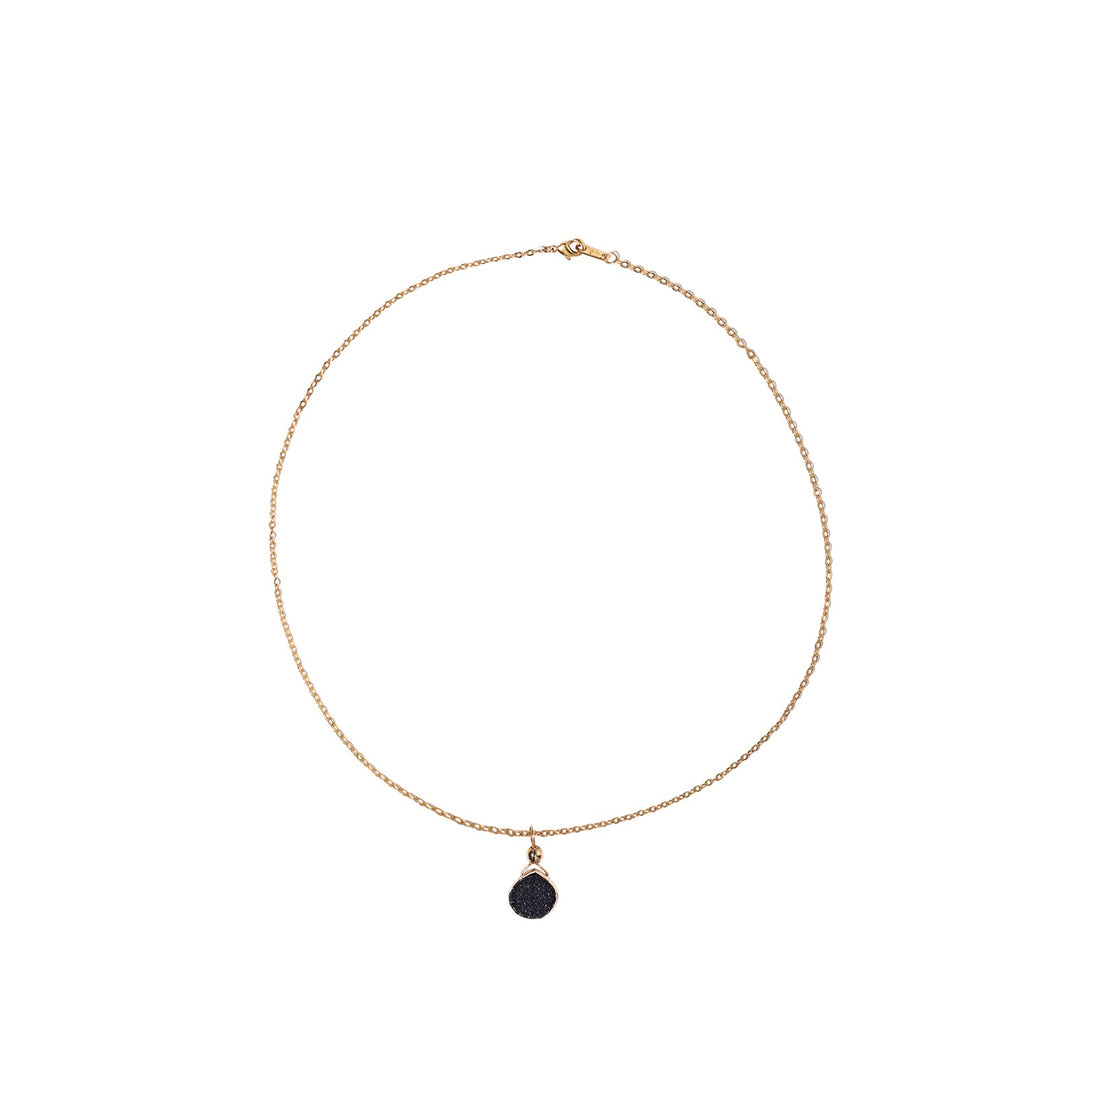 Julianna Pendant with Black Druzy in Gold- Classic Pear Cut Necklaces Sayulita Sol 16 inch Gold Plate Chain 